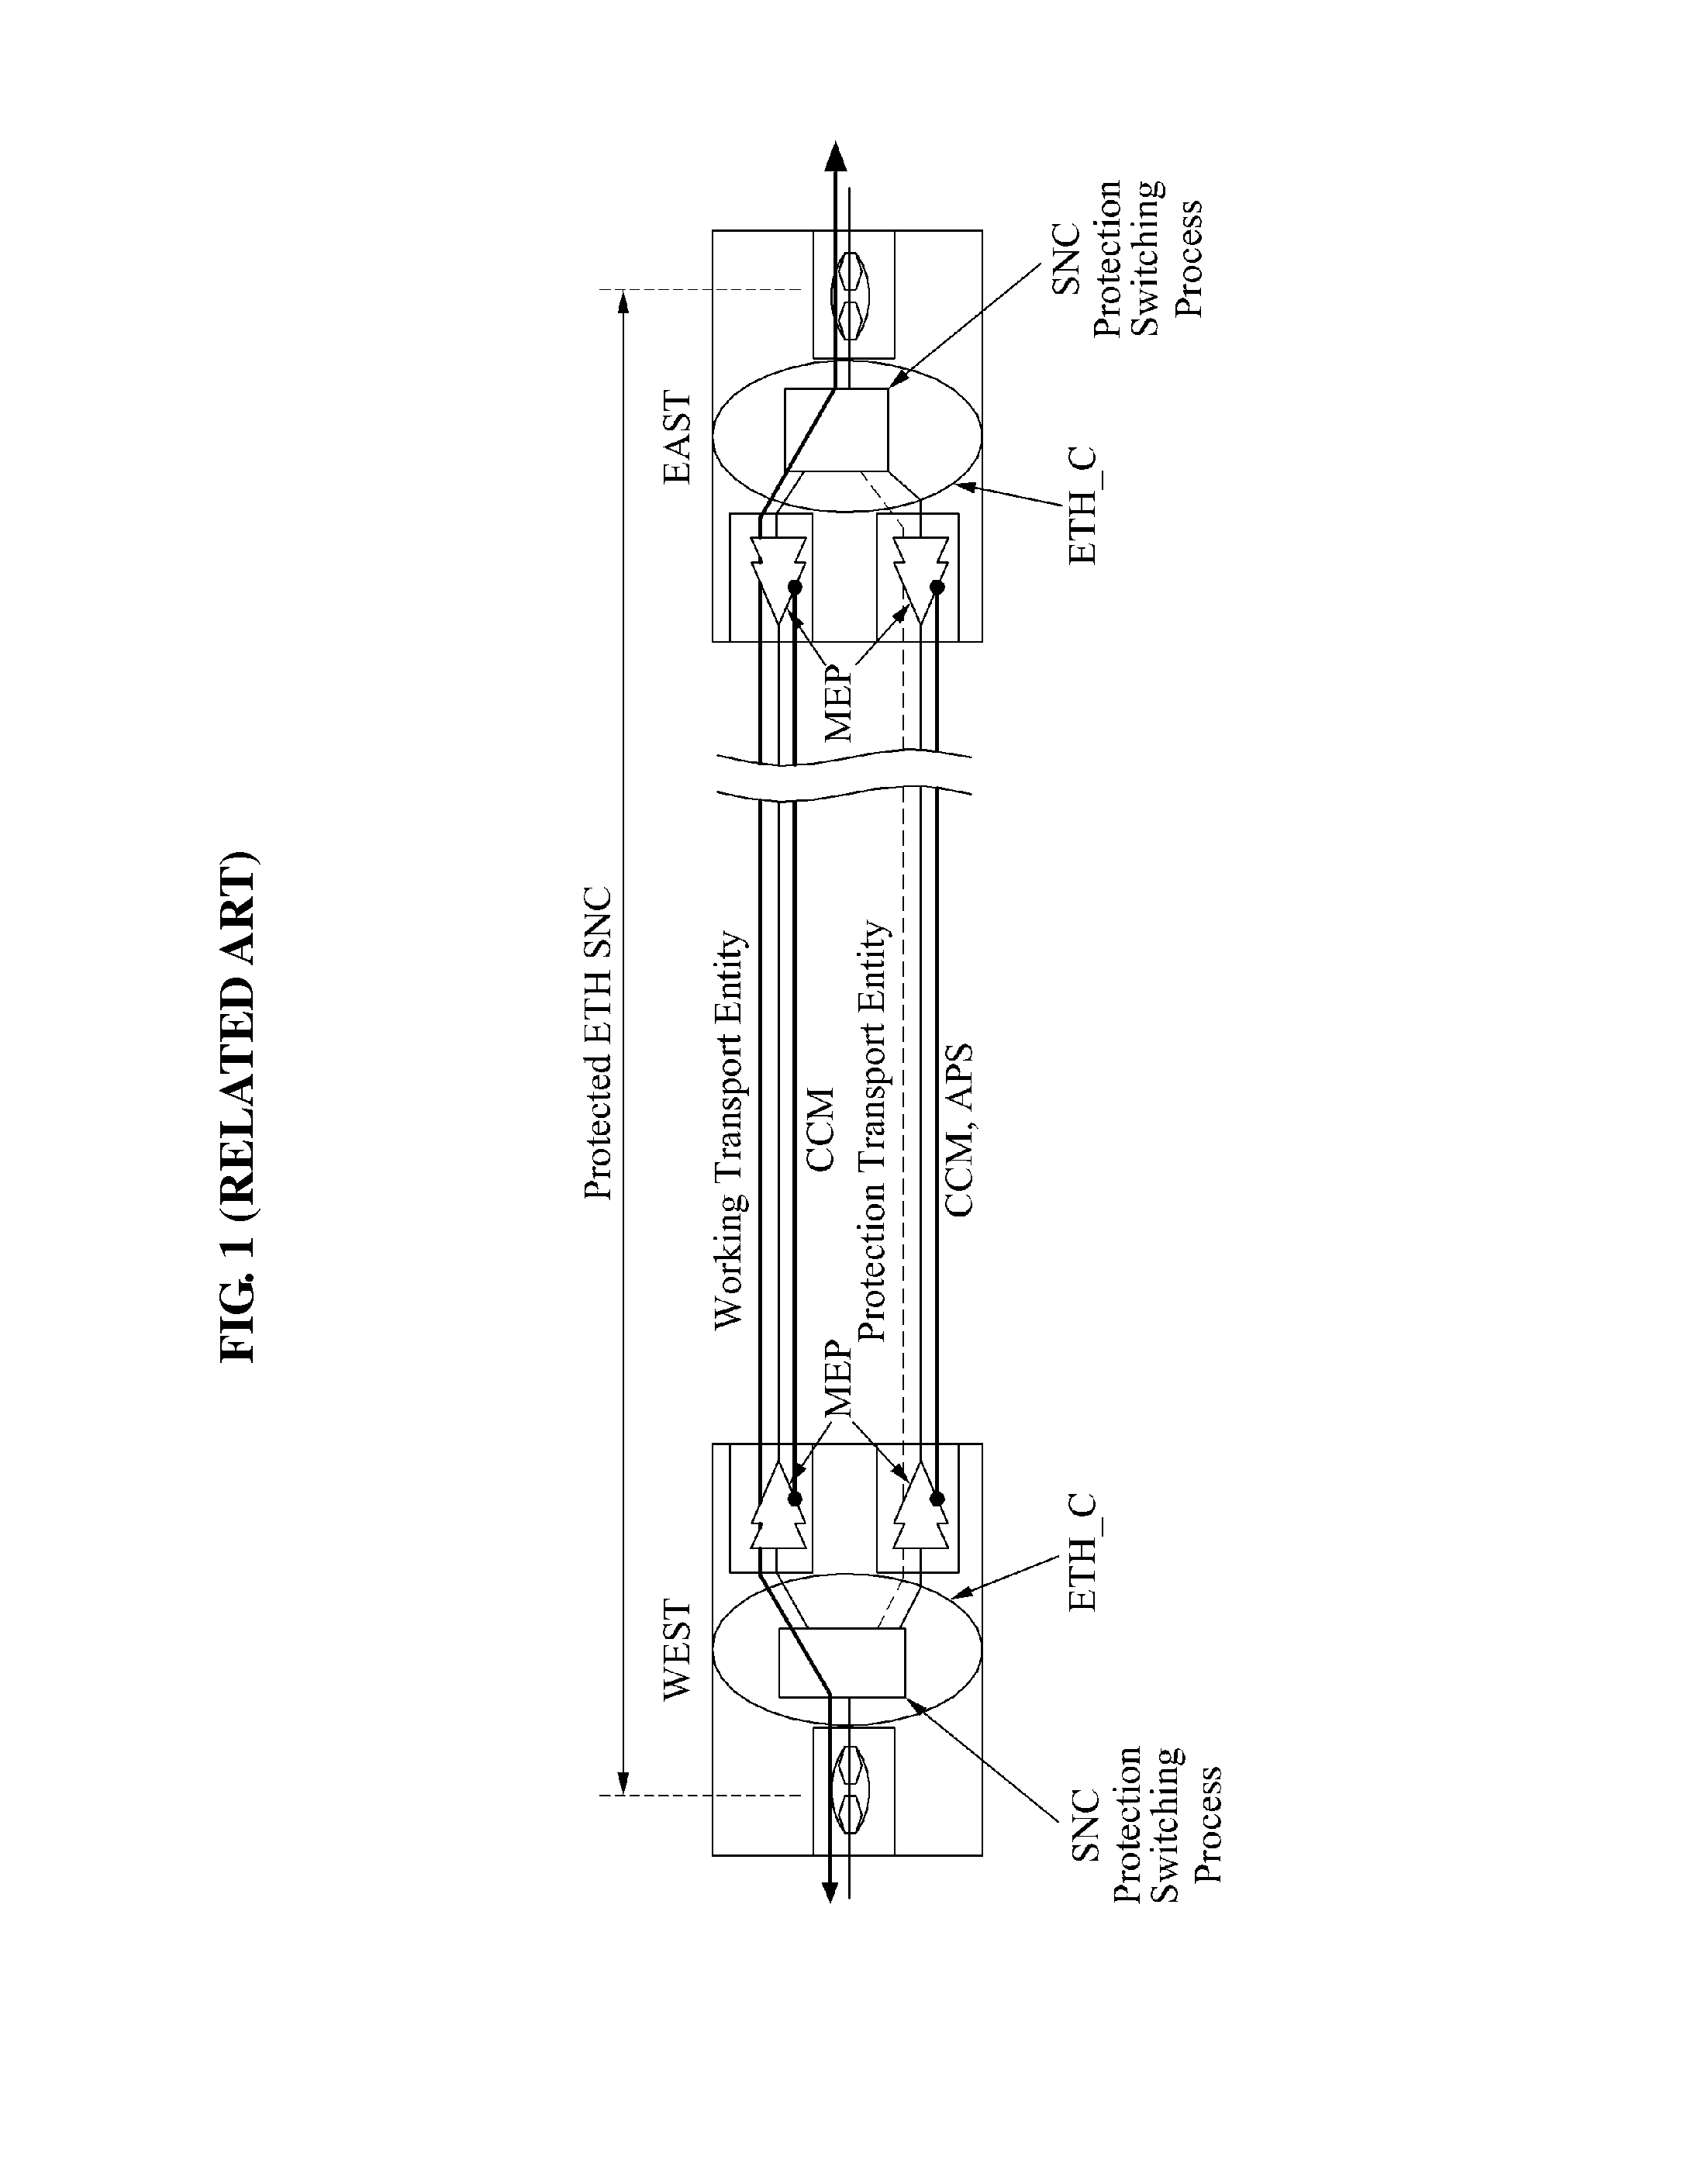 Method and apparatus for protection switching in rooted multipoint (RMP) connection networks